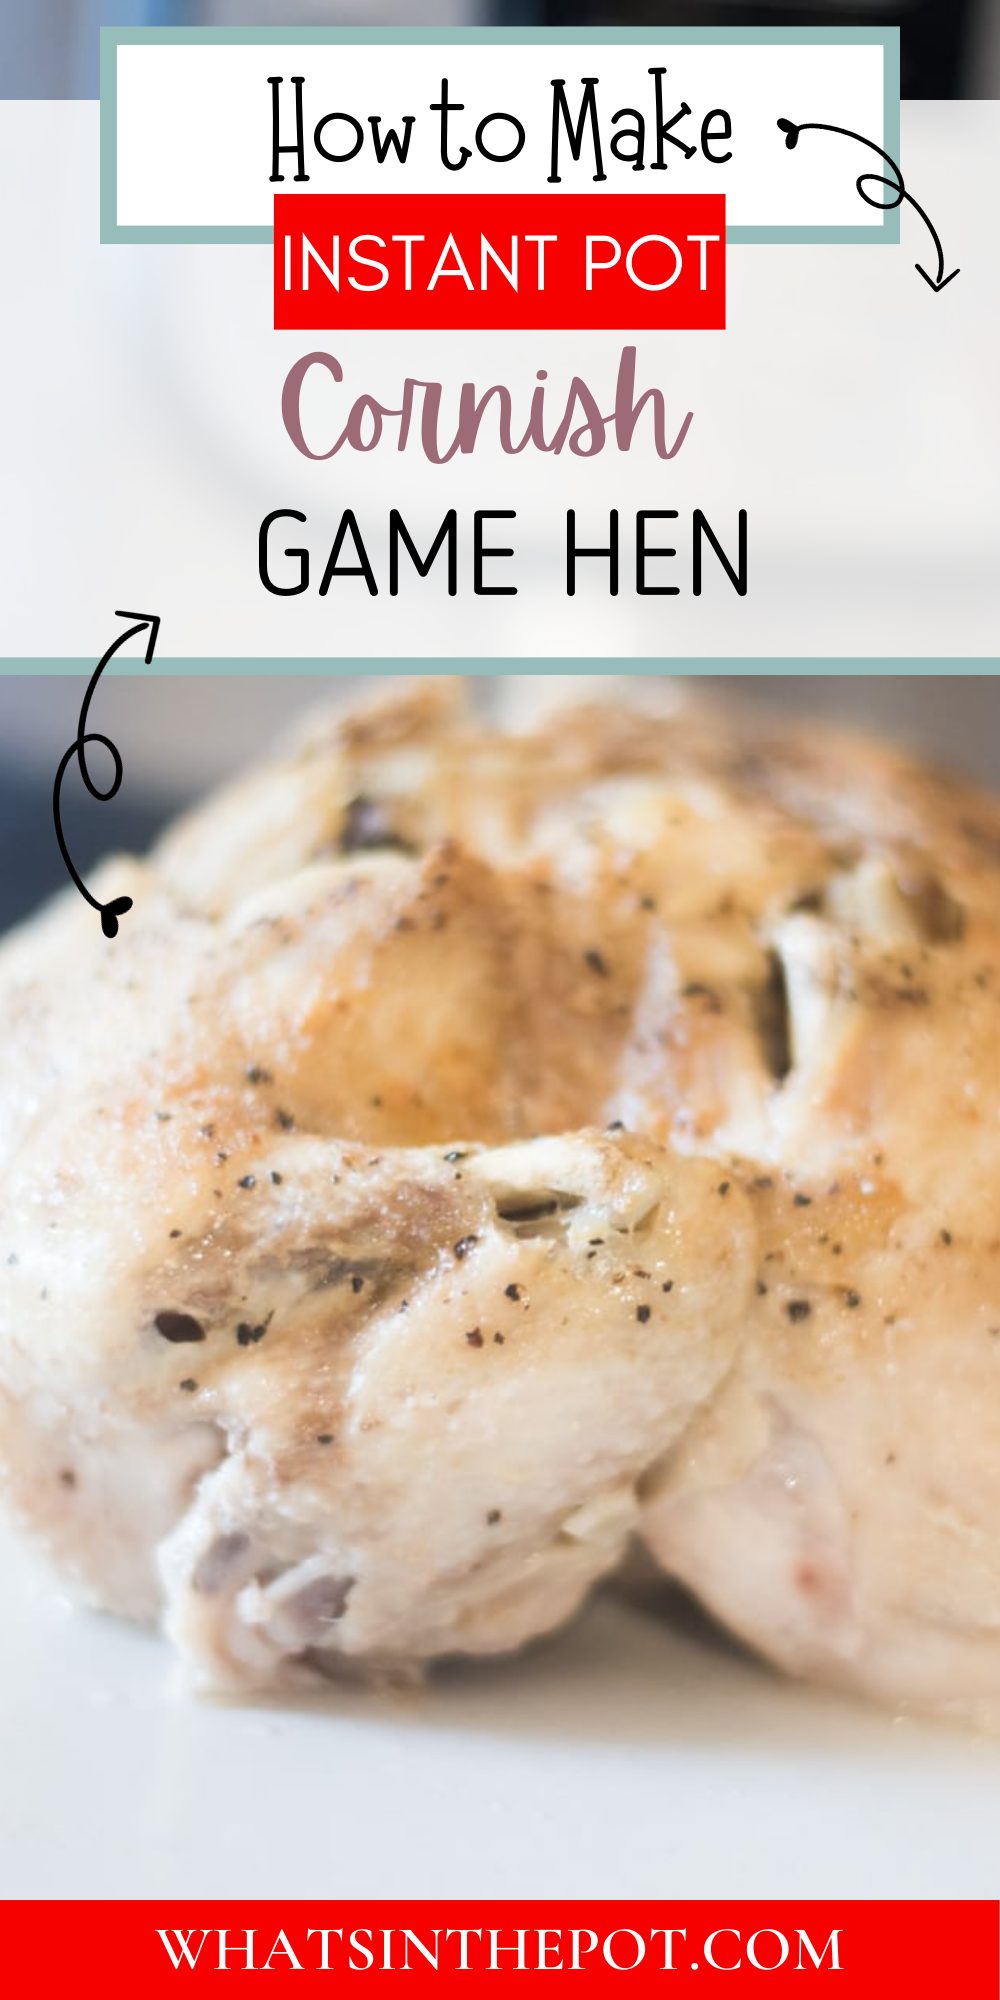 Need a last-minute fancy meal or Thanksgiving dish for just a couple of people? Instant Pot Cornish game hens are the answer!